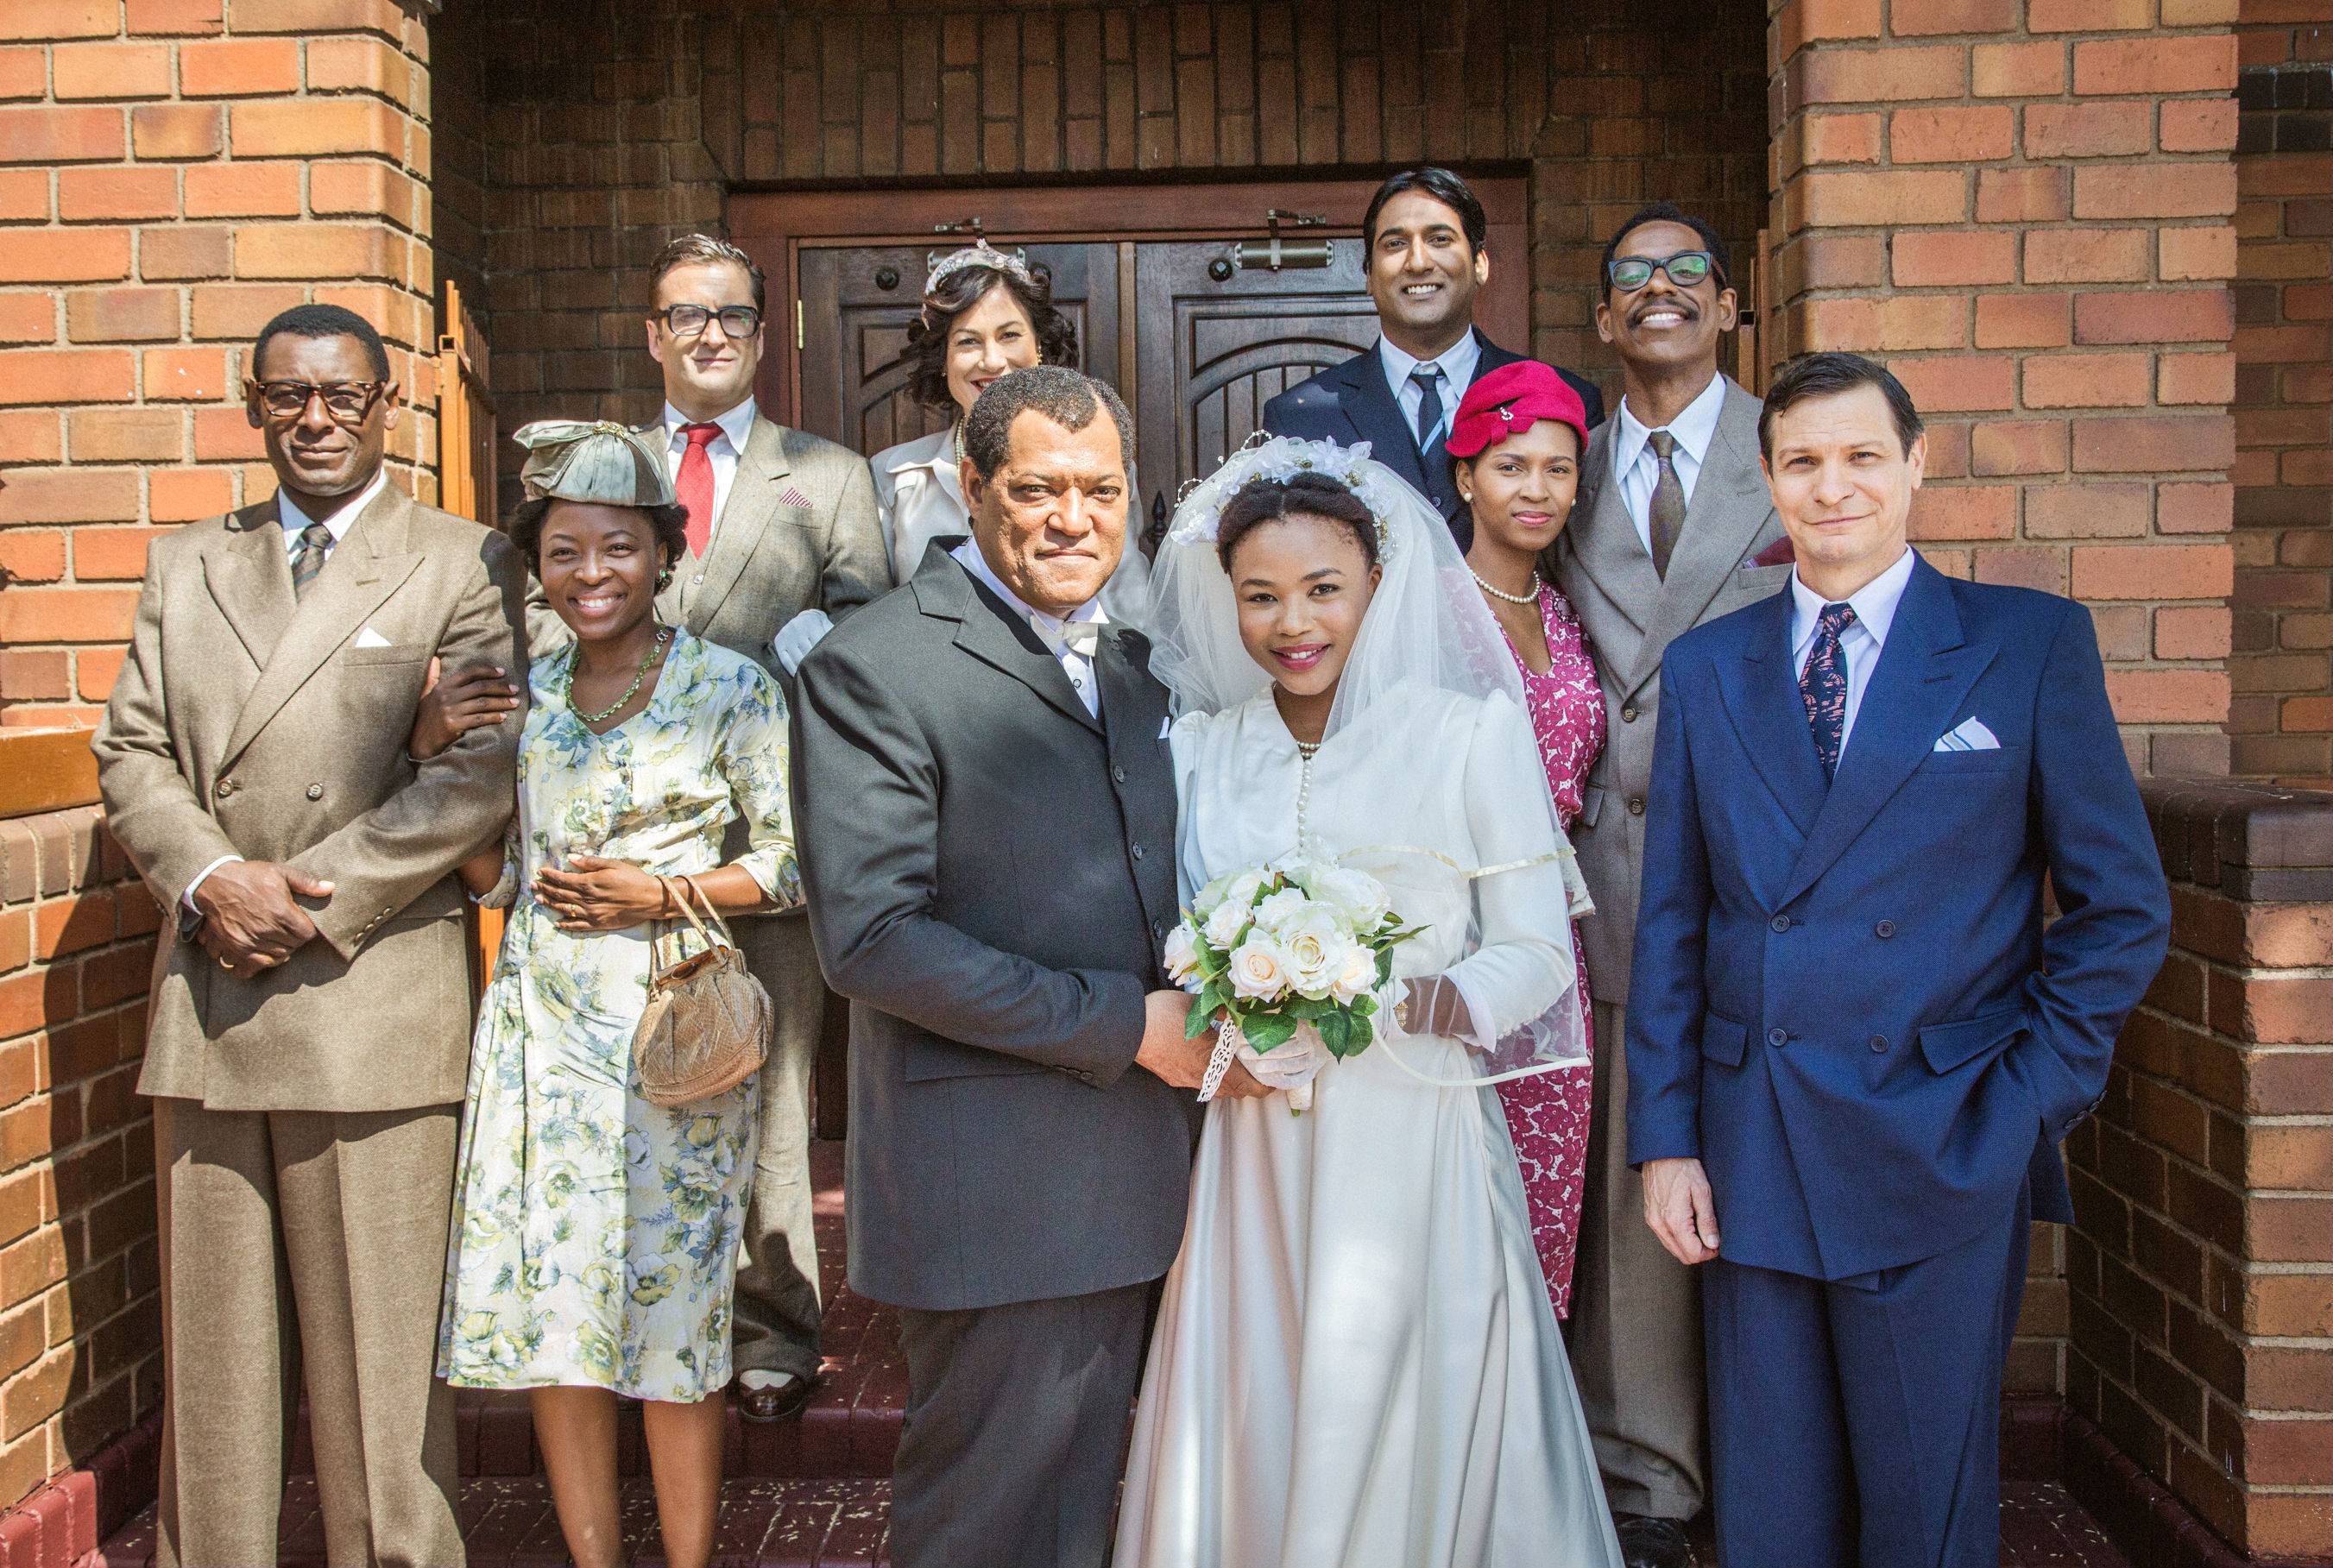 Actor Lawrence Fishburne and cast on set of Part 1 of BET's three part saga based on life of Nelson Mandela, titled Madiba.